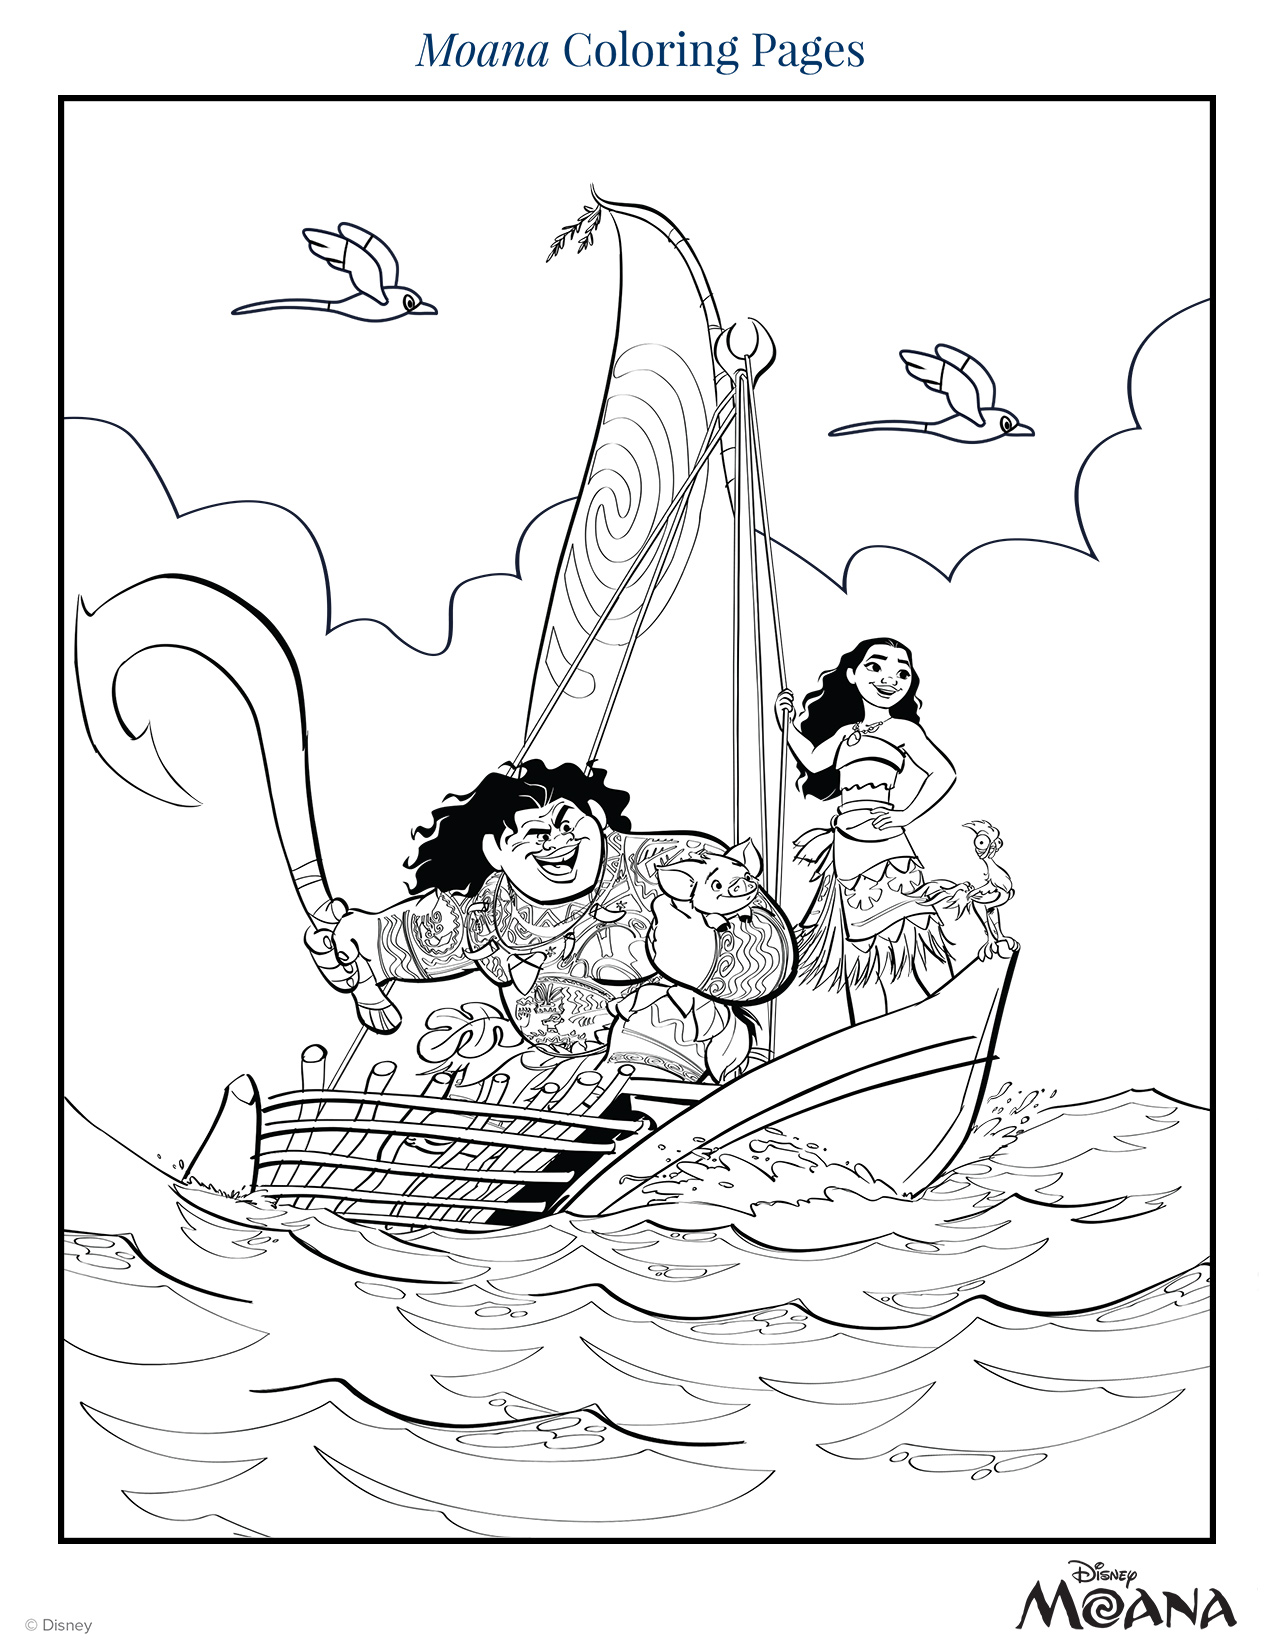 Moana Coloring Pages | Disney Family